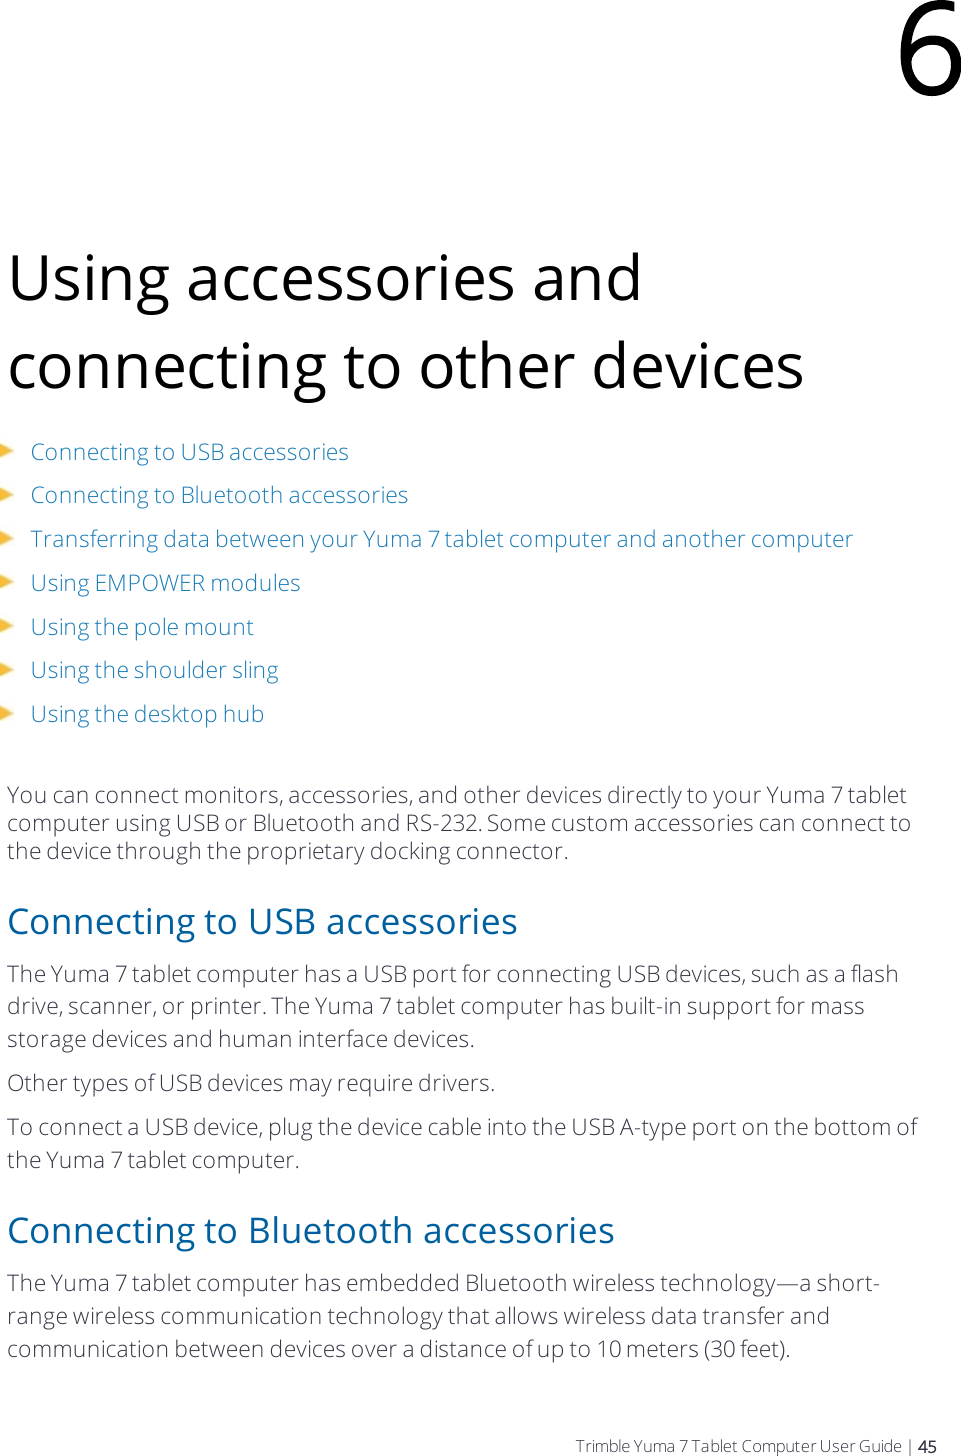 Using accessories and connecting to other devicesConnecting to USB accessoriesConnecting to Bluetooth accessoriesTransferring data between your  Yuma 7 tablet computer and another computerUsing EMPOWER modulesUsing the pole mountUsing the shoulder slingUsing the desktop hubYou can connect monitors, accessories, and other devices directly to your  Yuma 7 tablet computer using USB or Bluetooth and RS-232. Some custom accessories can connect to the device through the proprietary docking connector.Connecting to USB accessoriesThe  Yuma 7 tablet computer has a USB port for connecting USB devices, such as a flash drive, scanner, or printer. The  Yuma 7 tablet computer has built-in support for mass storage devices and human interface devices.Other types of USB devices may require drivers.To connect a USB device, plug the device cable into the USB A-type port on the bottom of the  Yuma 7 tablet computer.Connecting to Bluetooth accessoriesThe  Yuma 7 tablet computer has embedded Bluetooth wireless technology—a short-range wireless communication technology that allows wireless data transfer and communication between devices over a distance of up to 10 meters (30 feet).6Trimble Yuma 7 Tablet Computer User Guide | 45